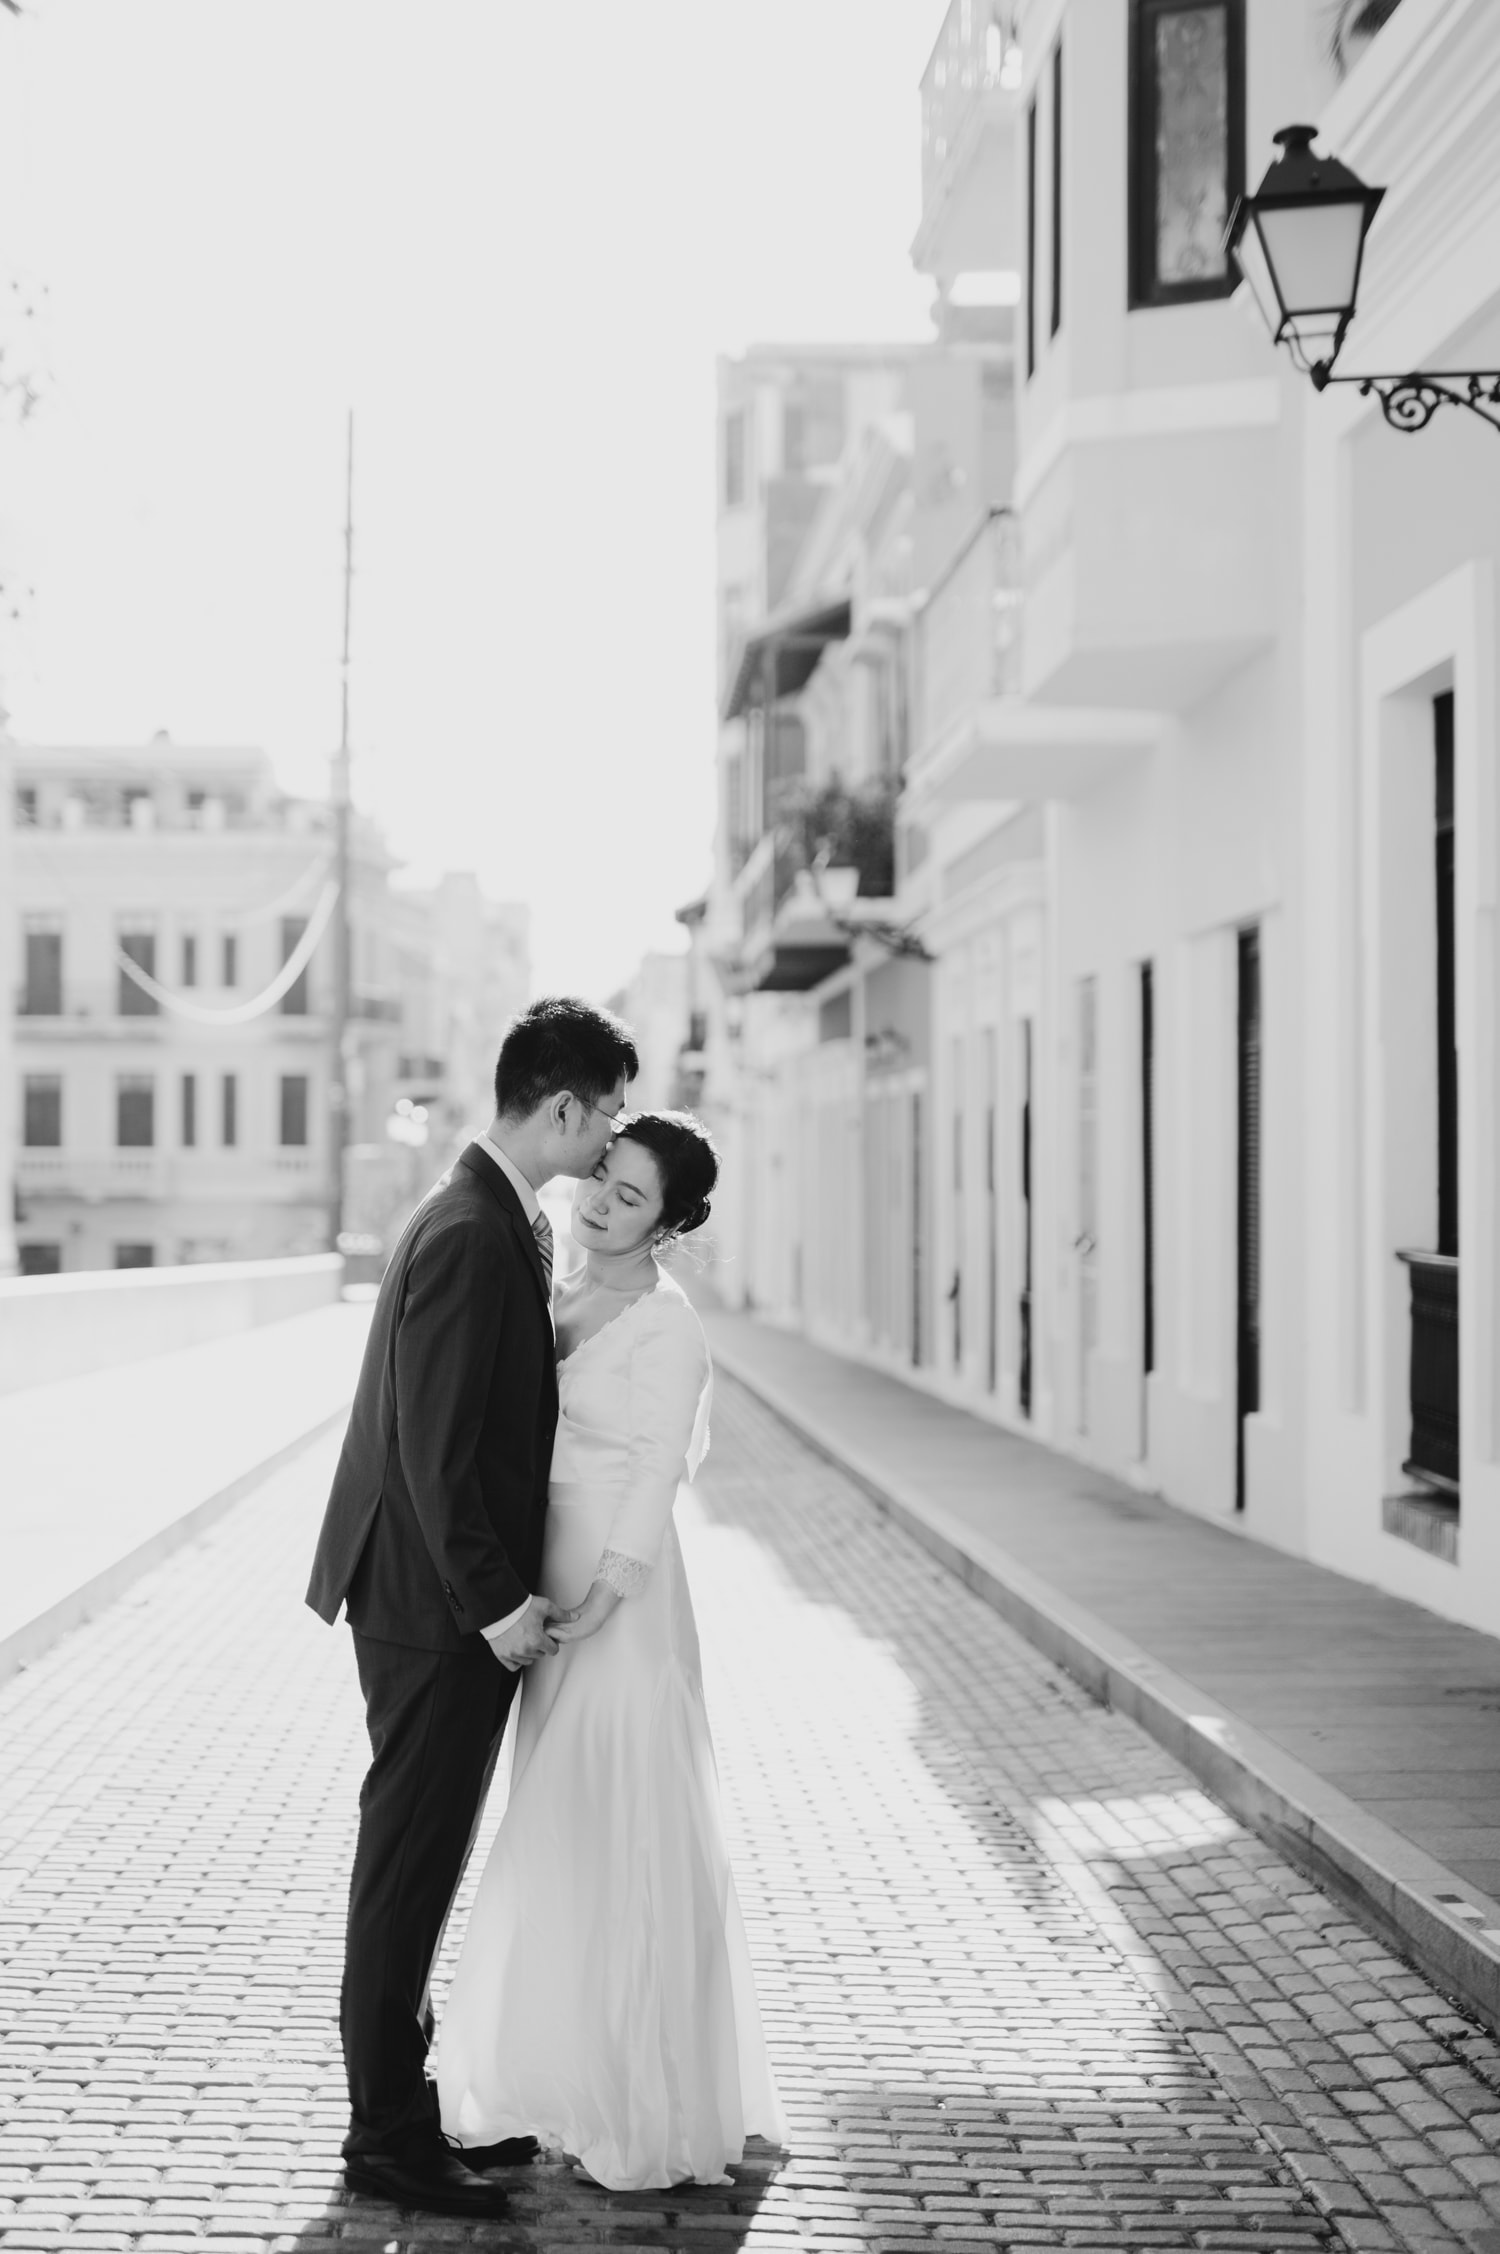 Old San Juan Puerto Rico wedding photography by Camille Fontanez